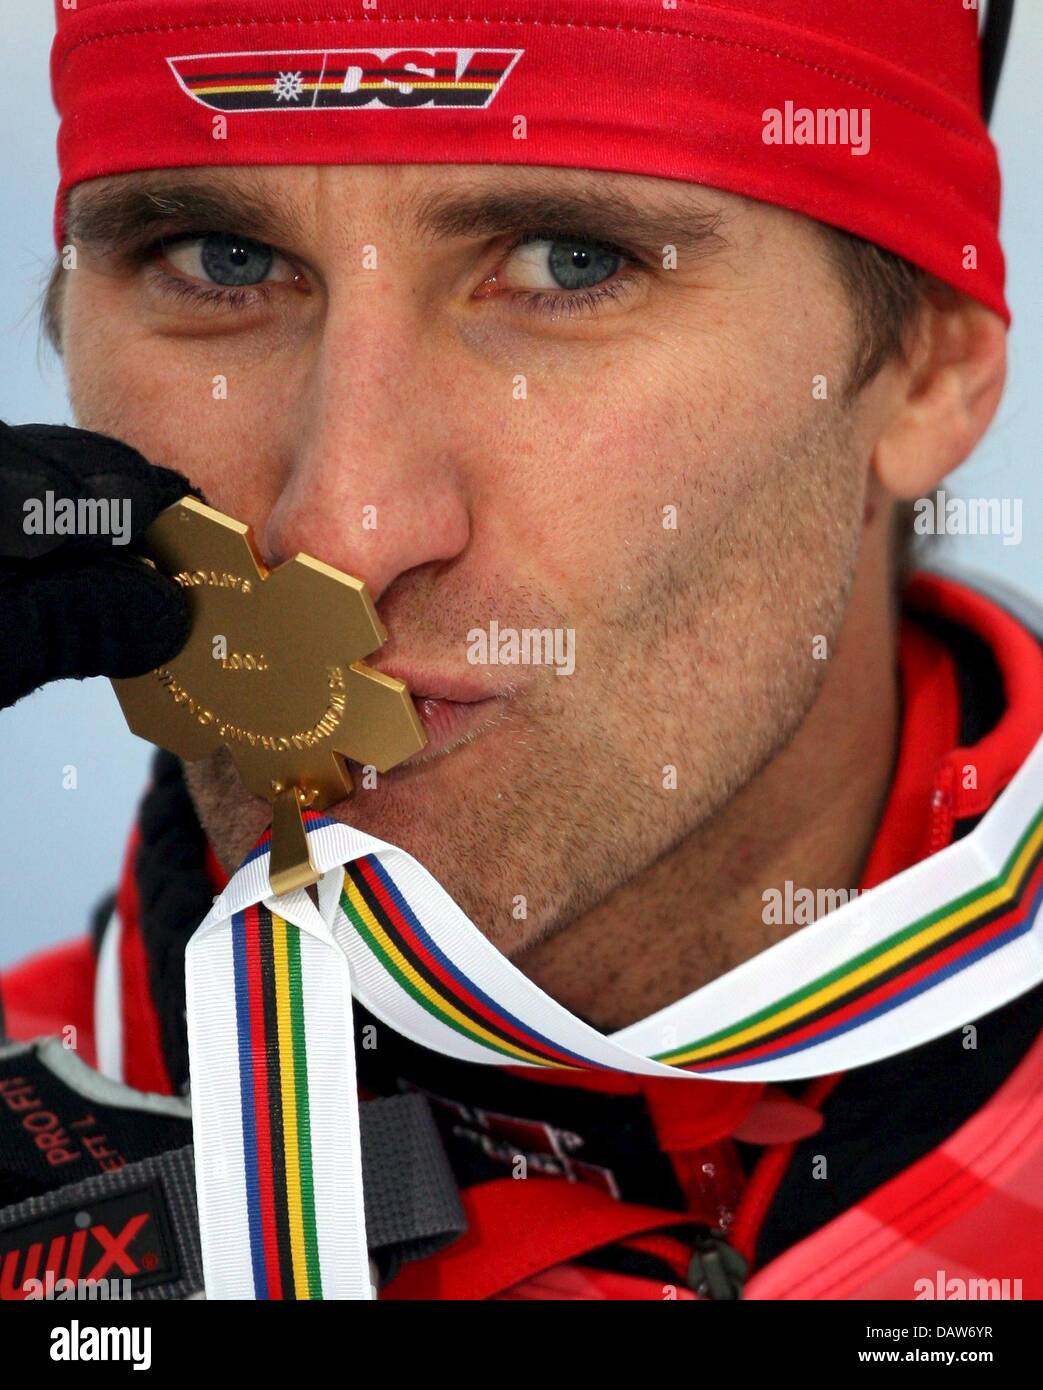 Download preview image - nordic-combiner-ronny-ackermann-of-germany-kisses-his-gold-medal-conquered-DAW6YR